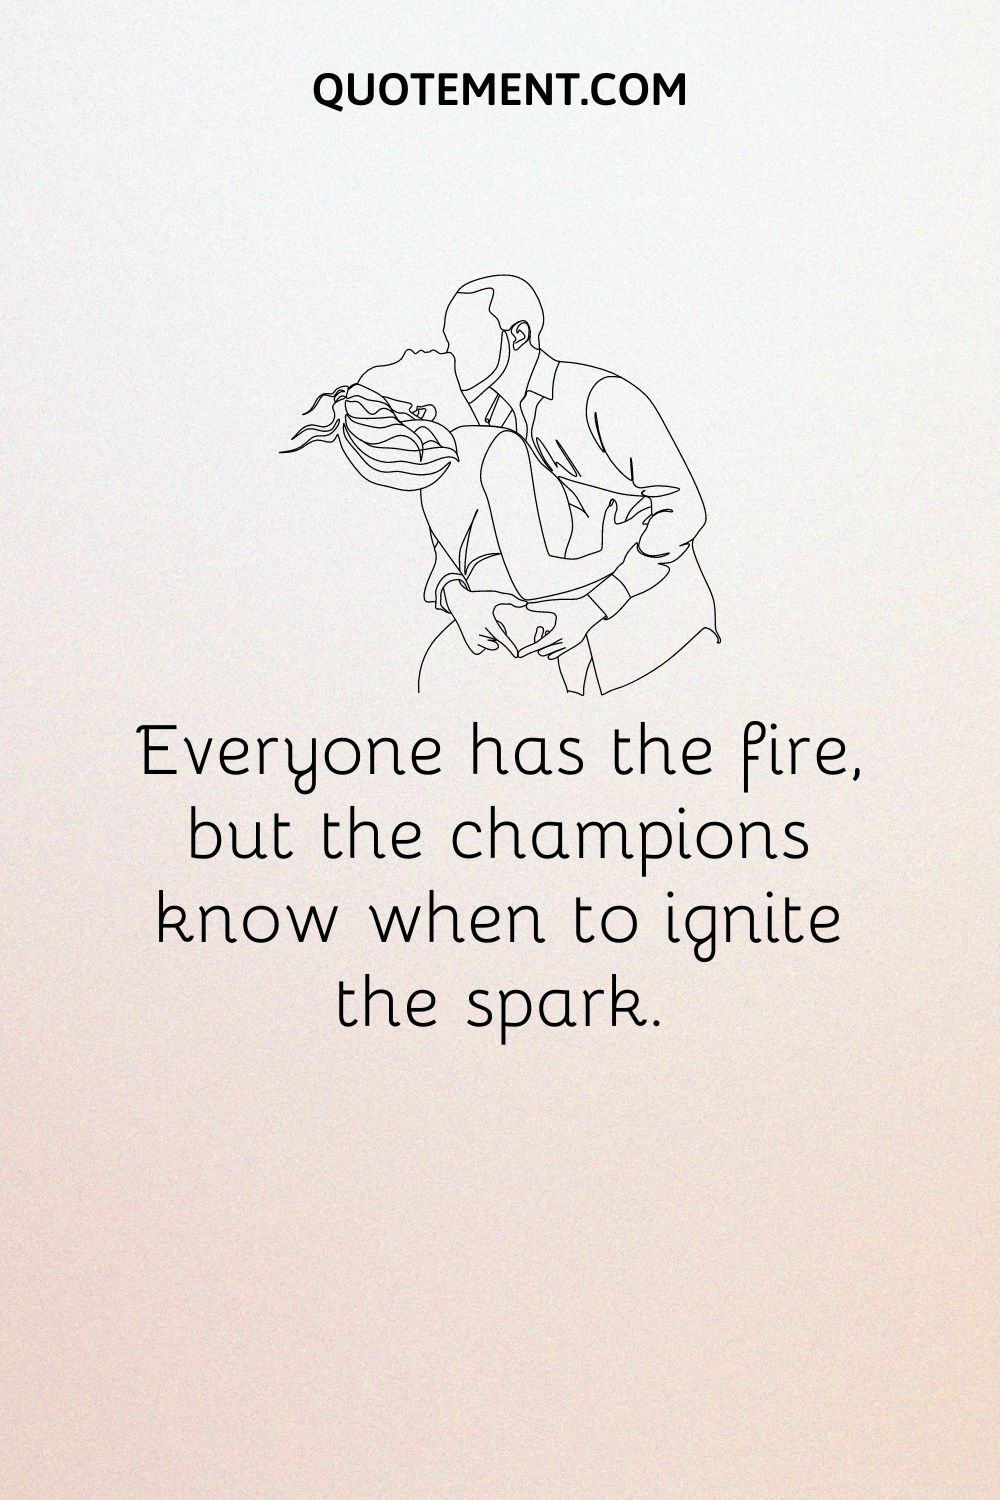 Everyone has the fire, but the champions know when to ignite the spark